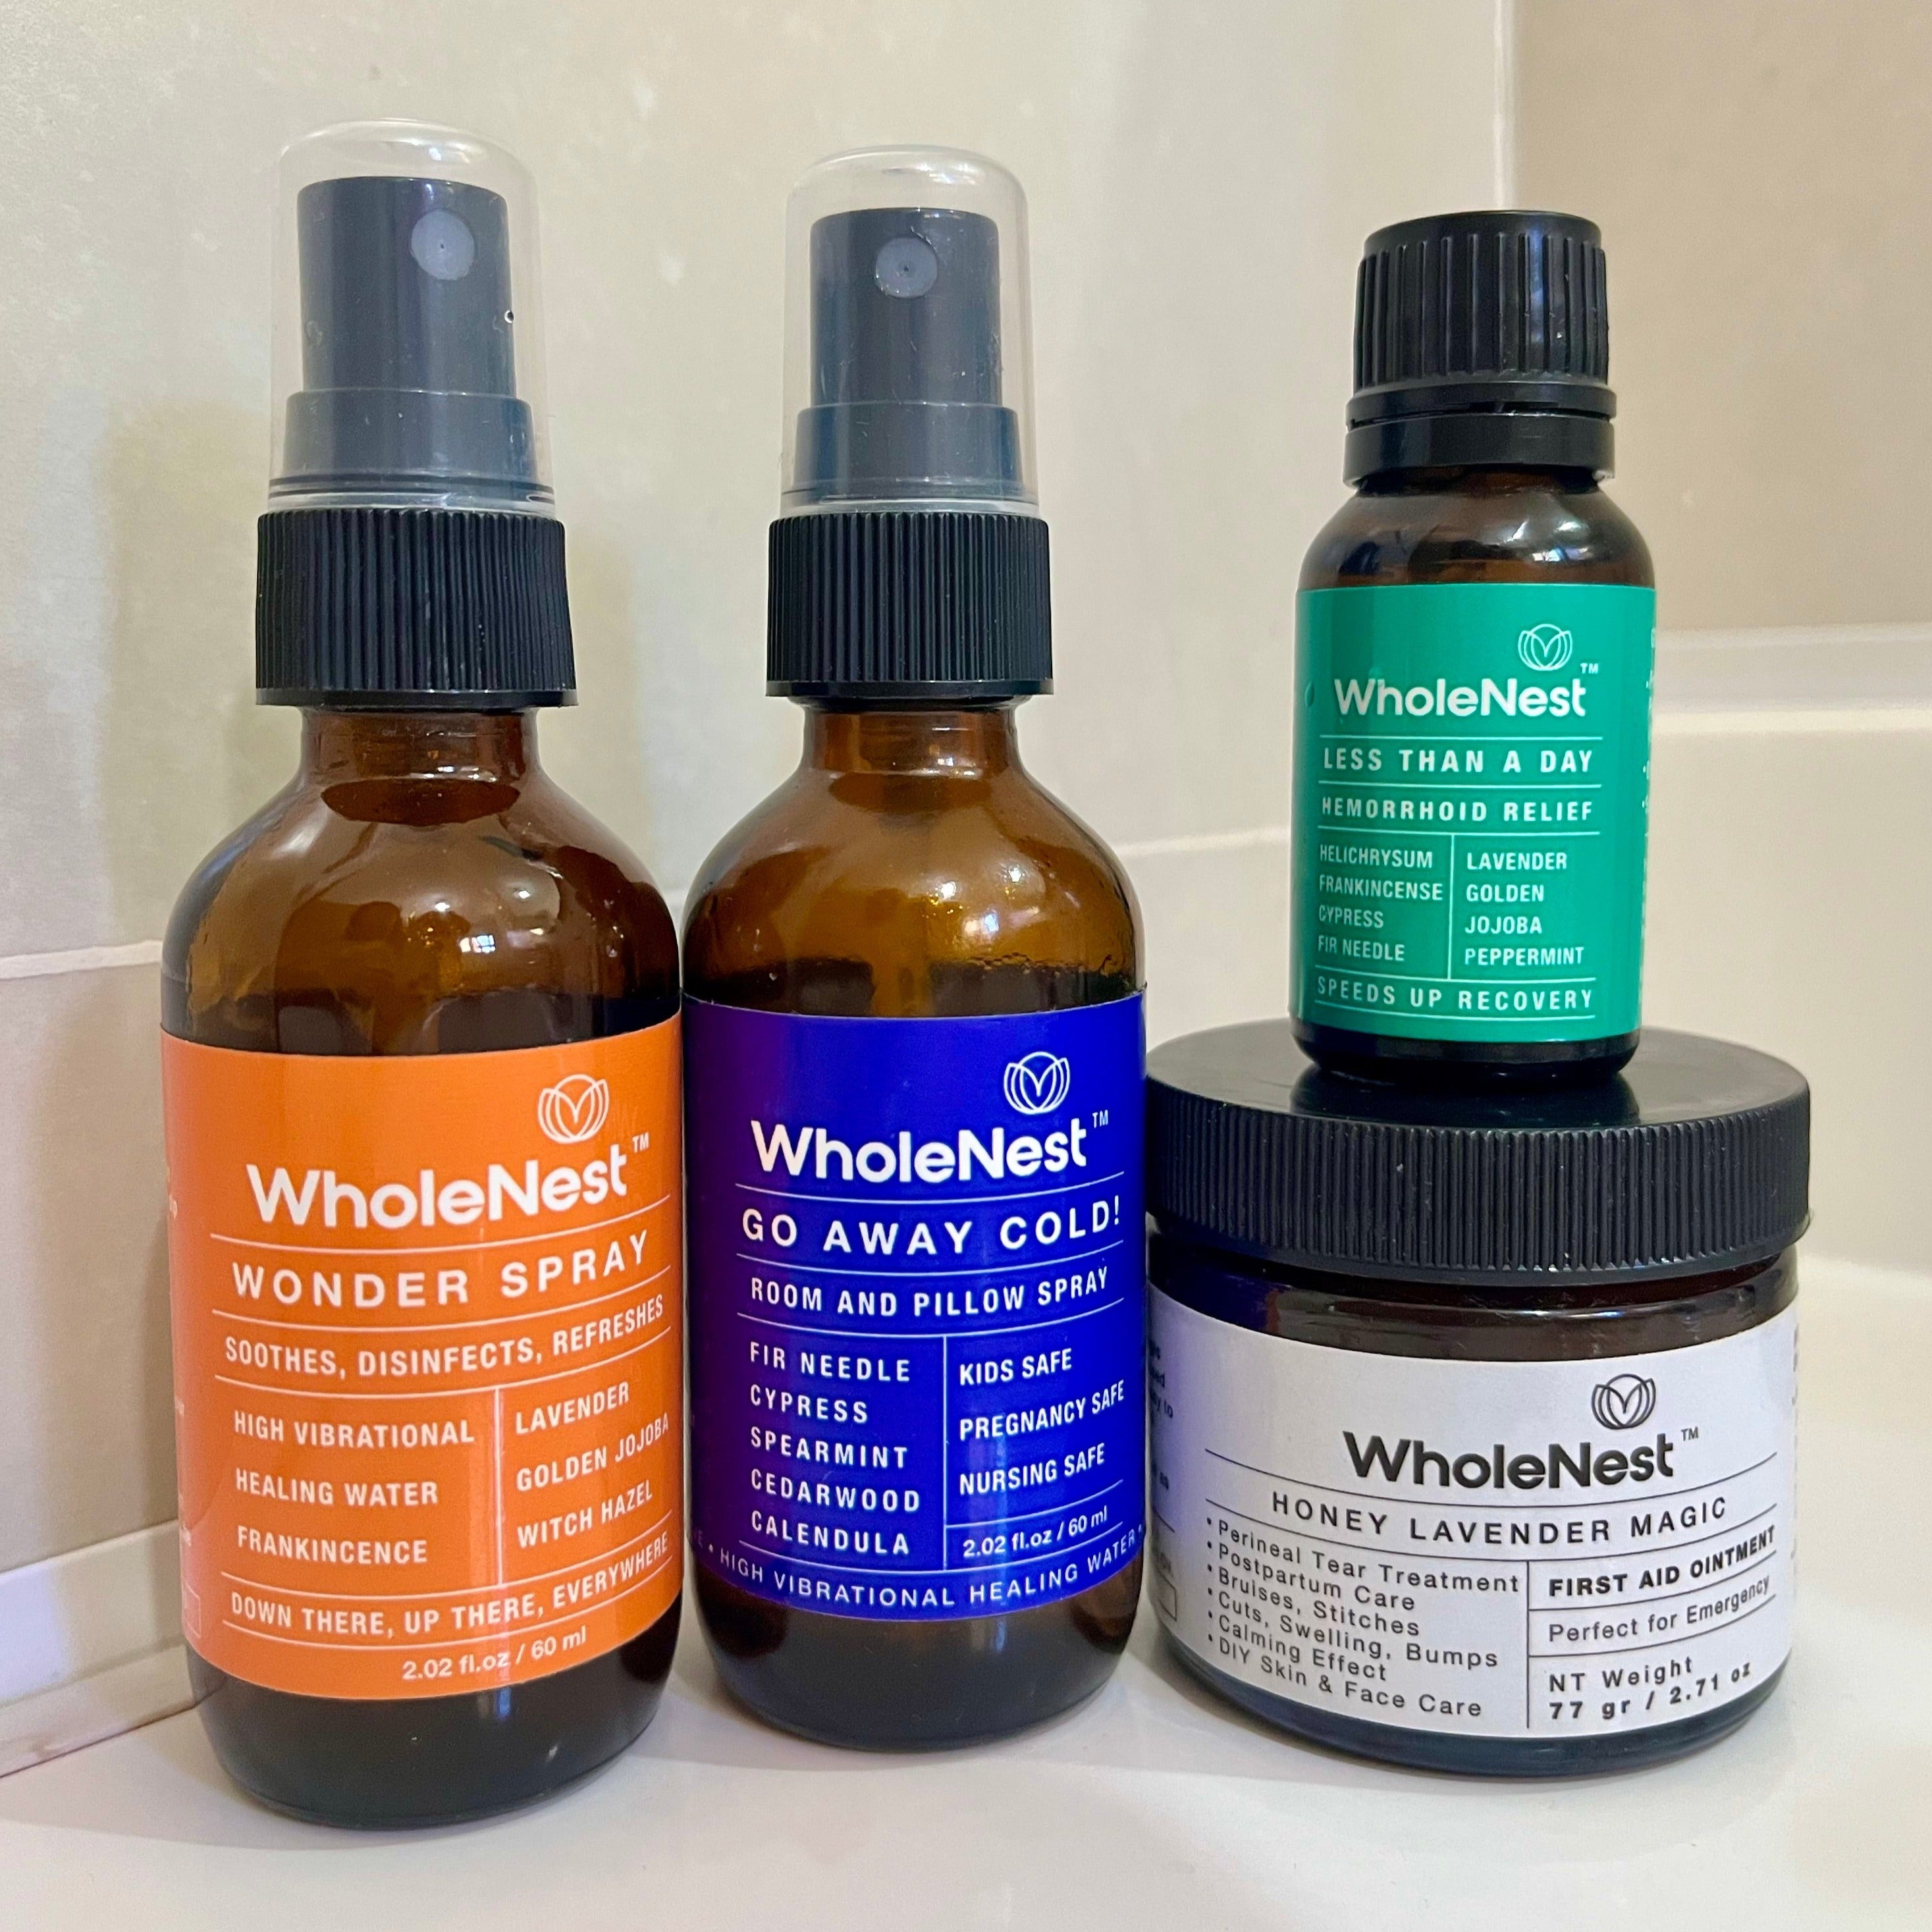 WholeNest is a line of all-natural postpartum products based on the mind-body connection and its natural healing abilities.